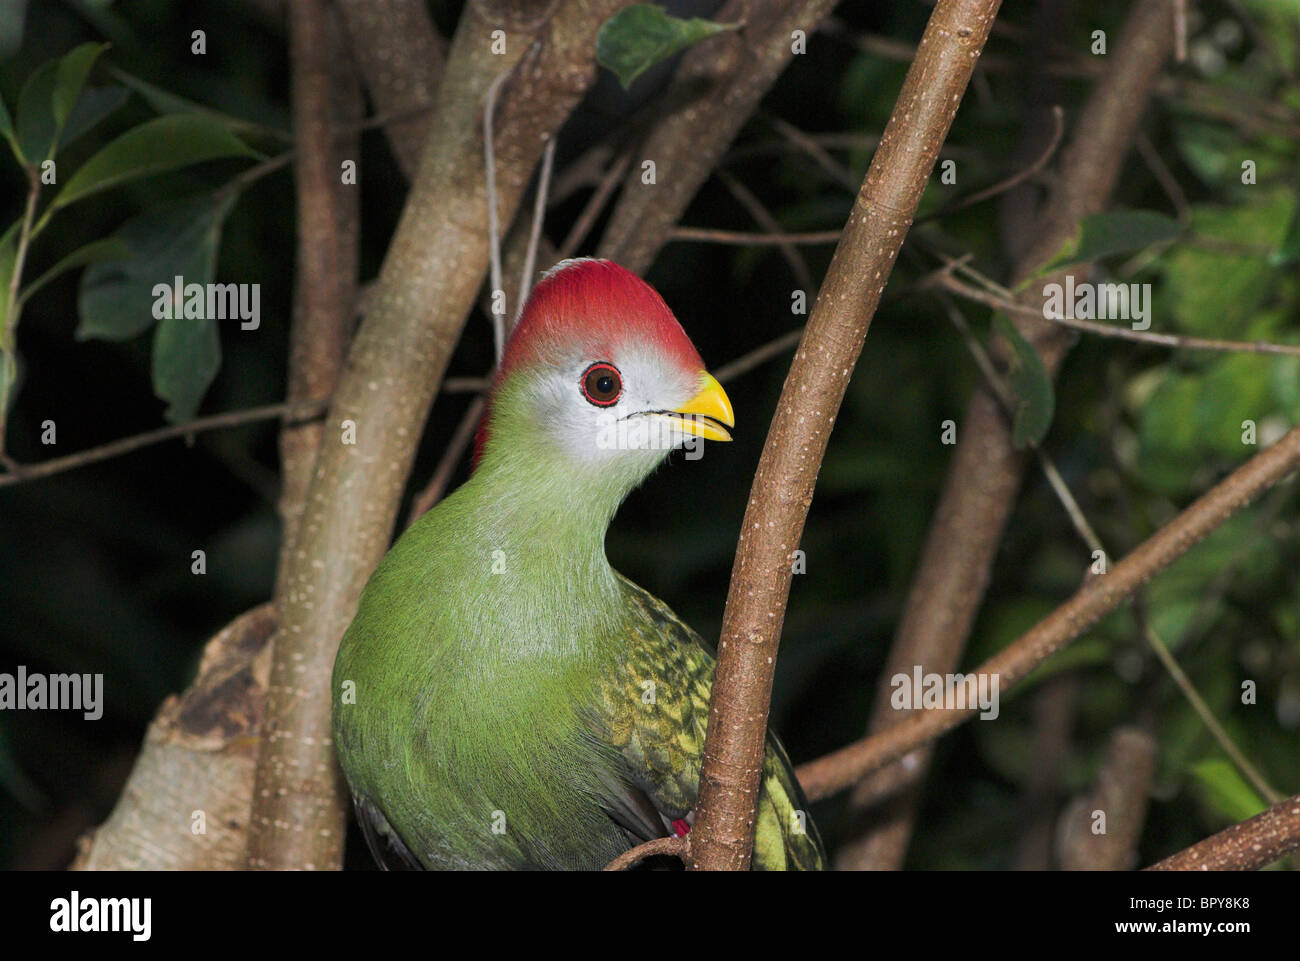 A Red Crested Turaco (Tauraco erythrolophus). Stock Photo